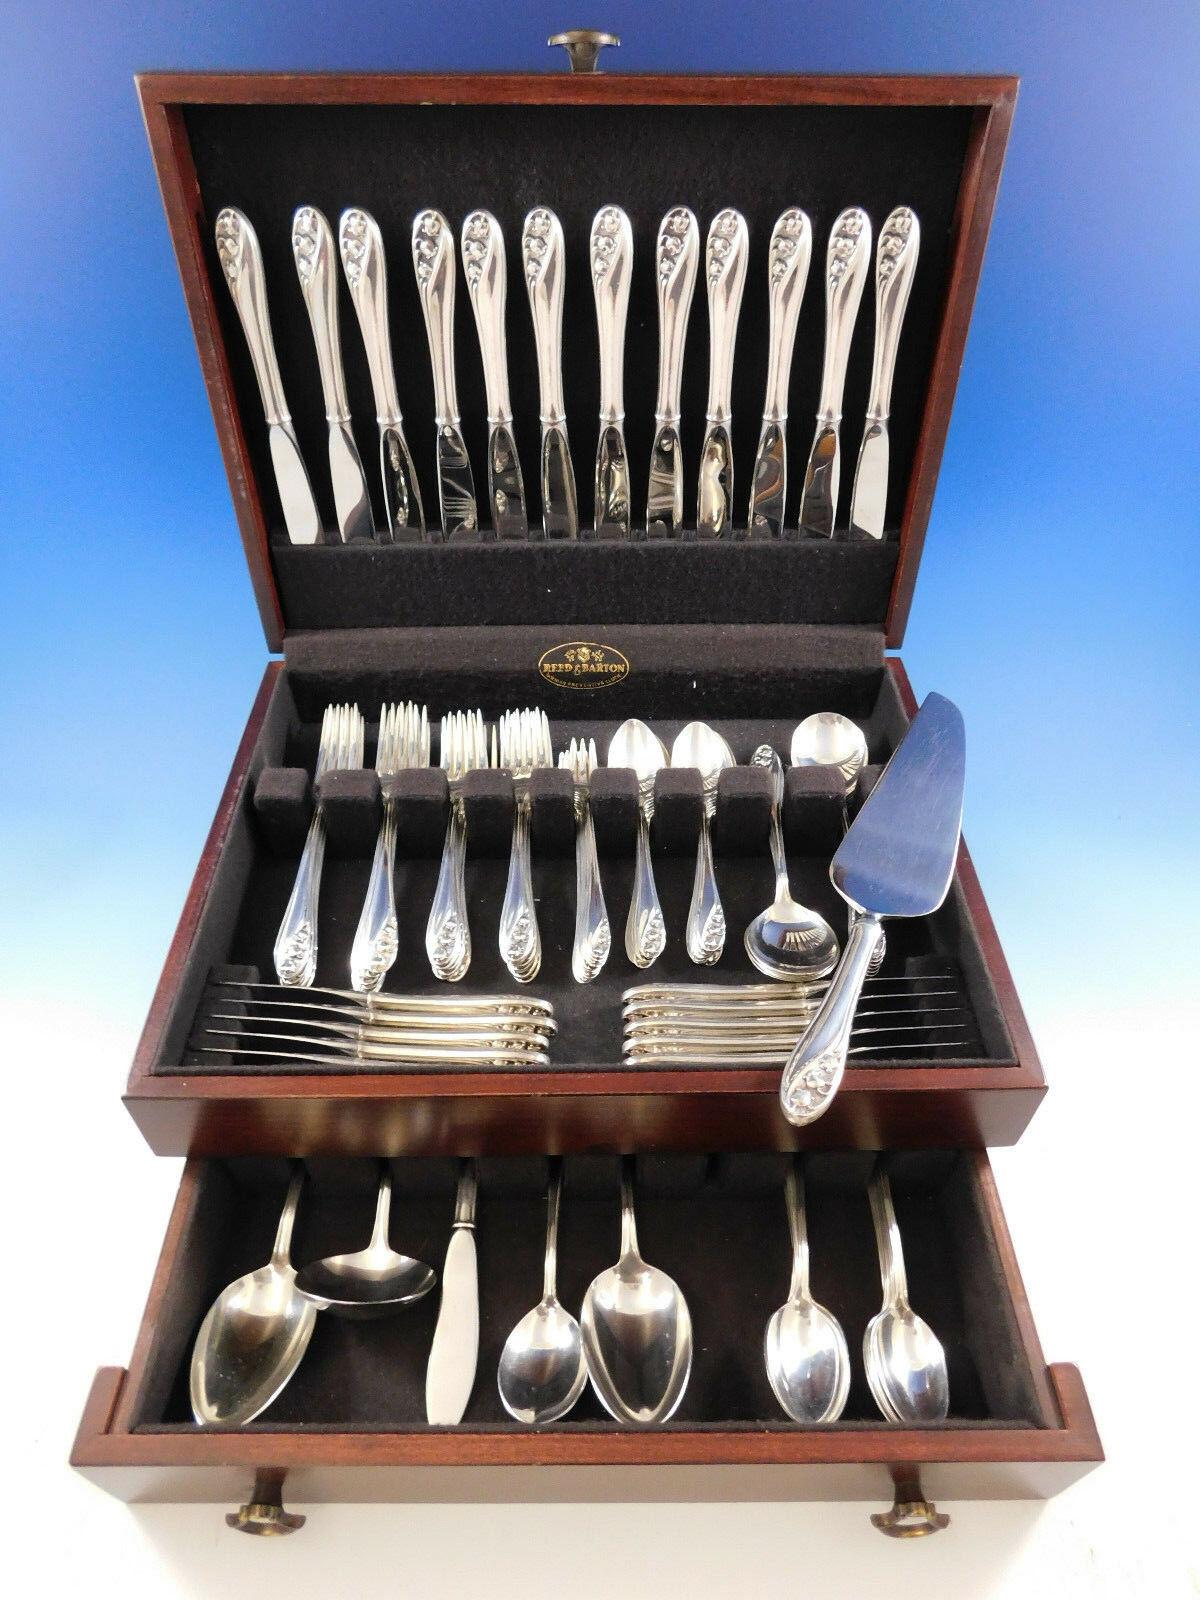 Monumental Lily of the Valley by Gorham sterling silver flatware set, 102 pieces. This set includes:

12 knives, 8 7/8